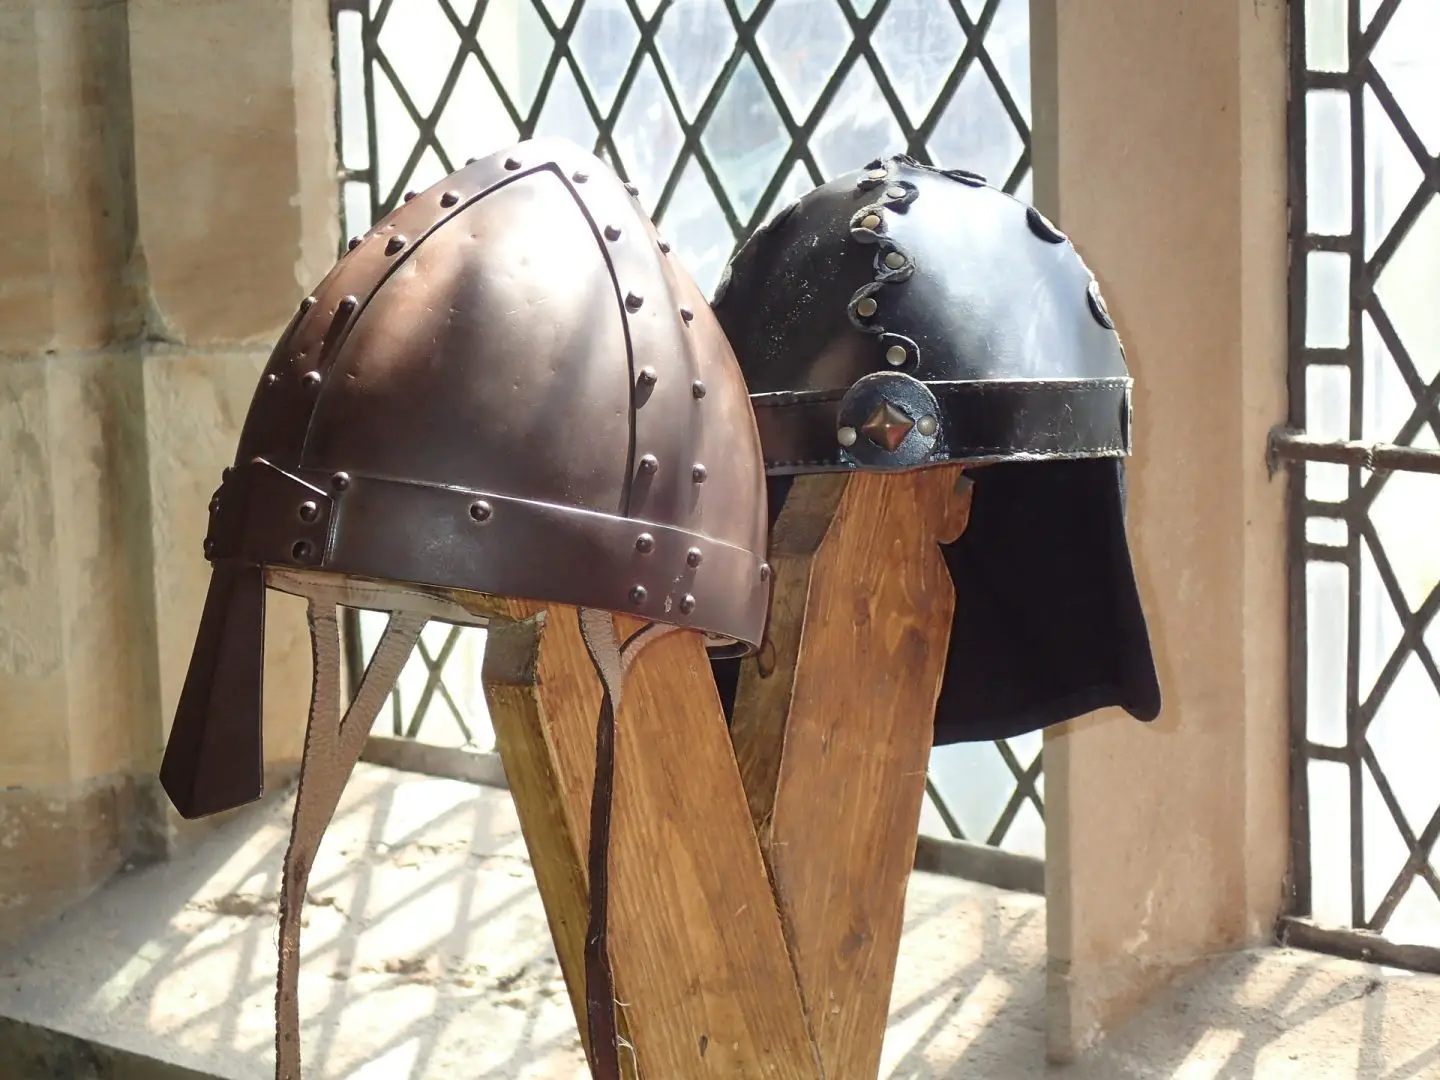 5 Things To Do In York With Kids | Viking helmets www.oddhogg.com